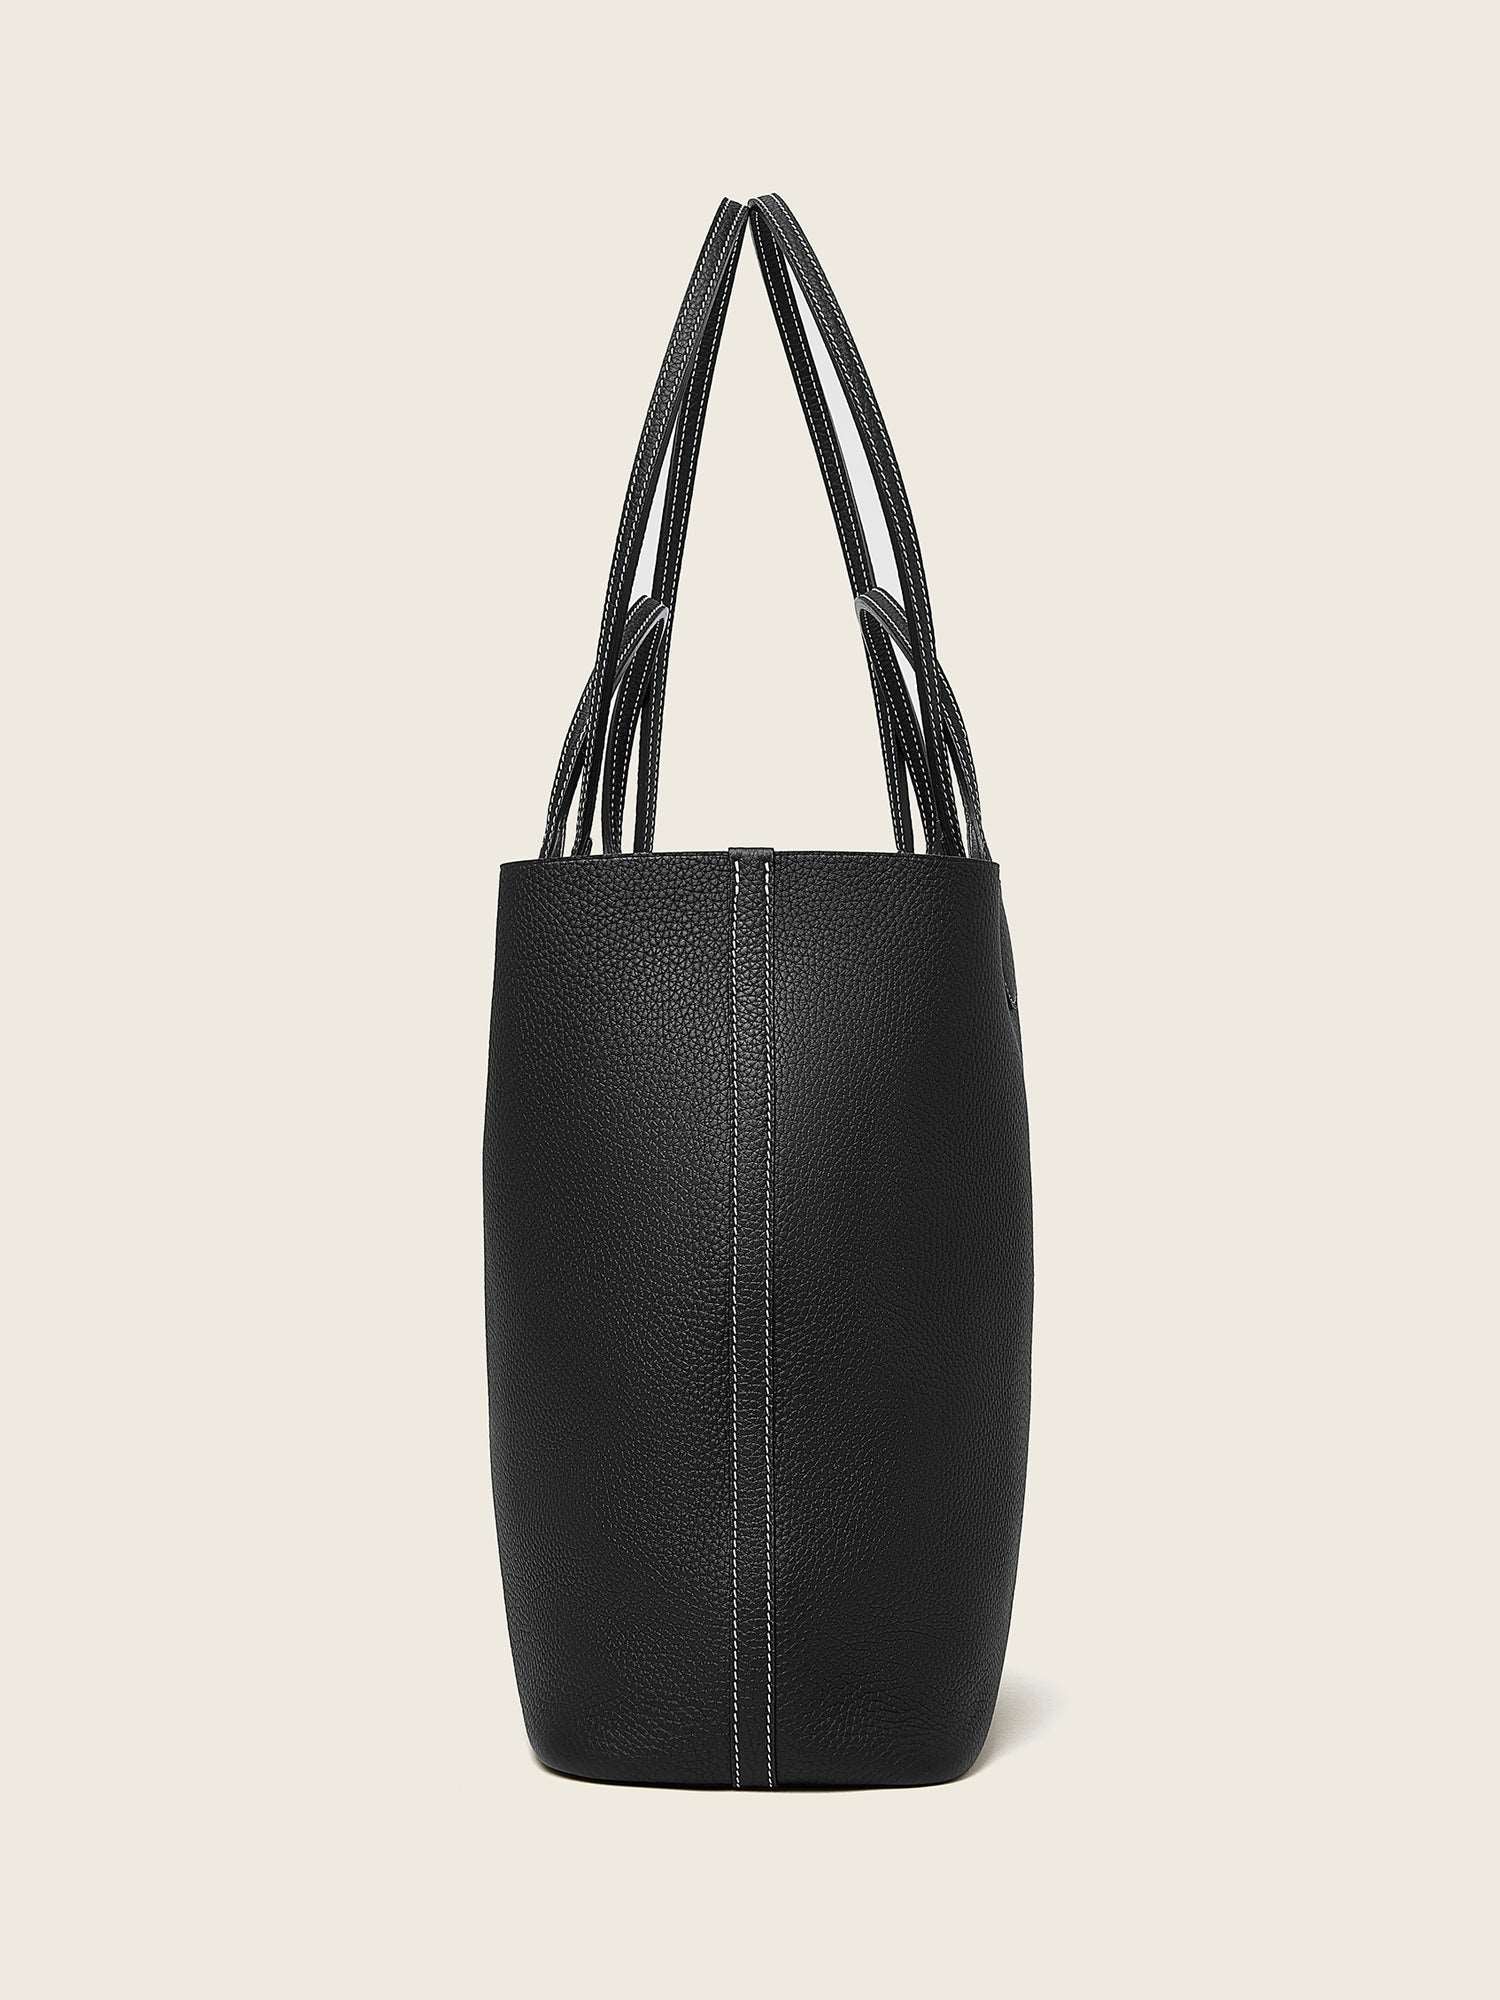 Hpai Large Yesod Tote Bag in Leather - Black